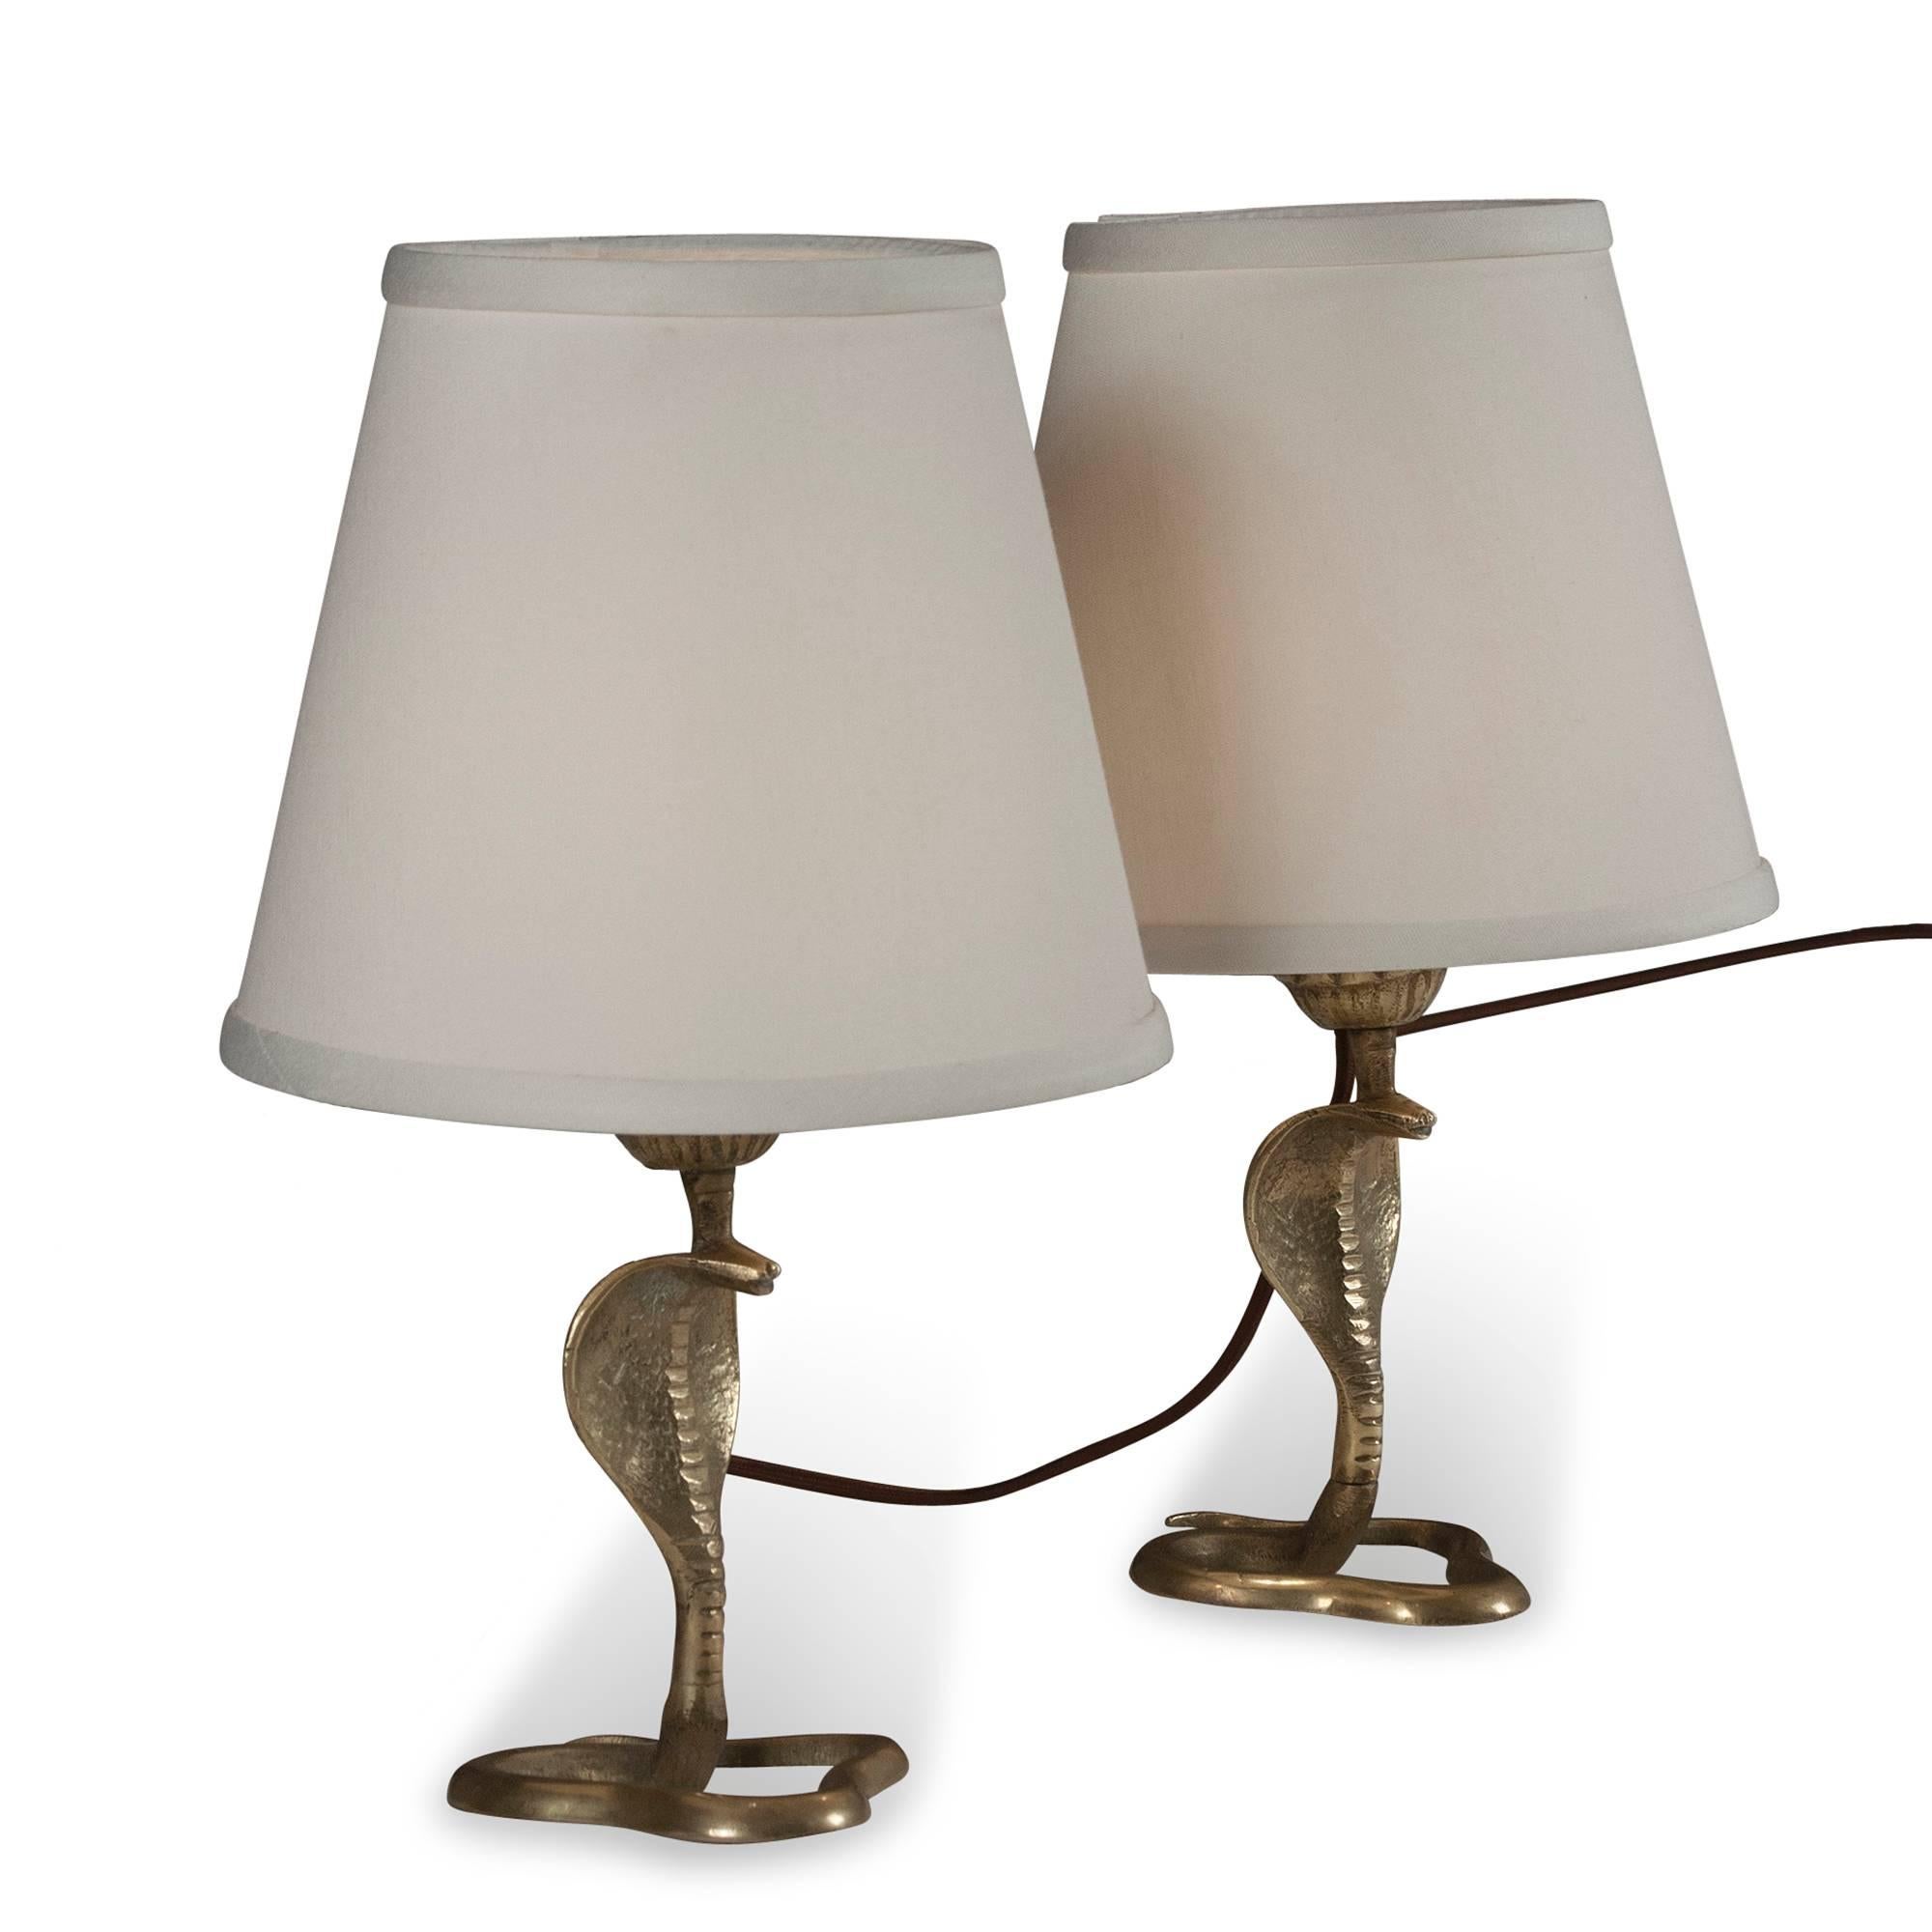 Mid-Century Modern Pair of Bronze Cobra Lamps, French, 1930s For Sale